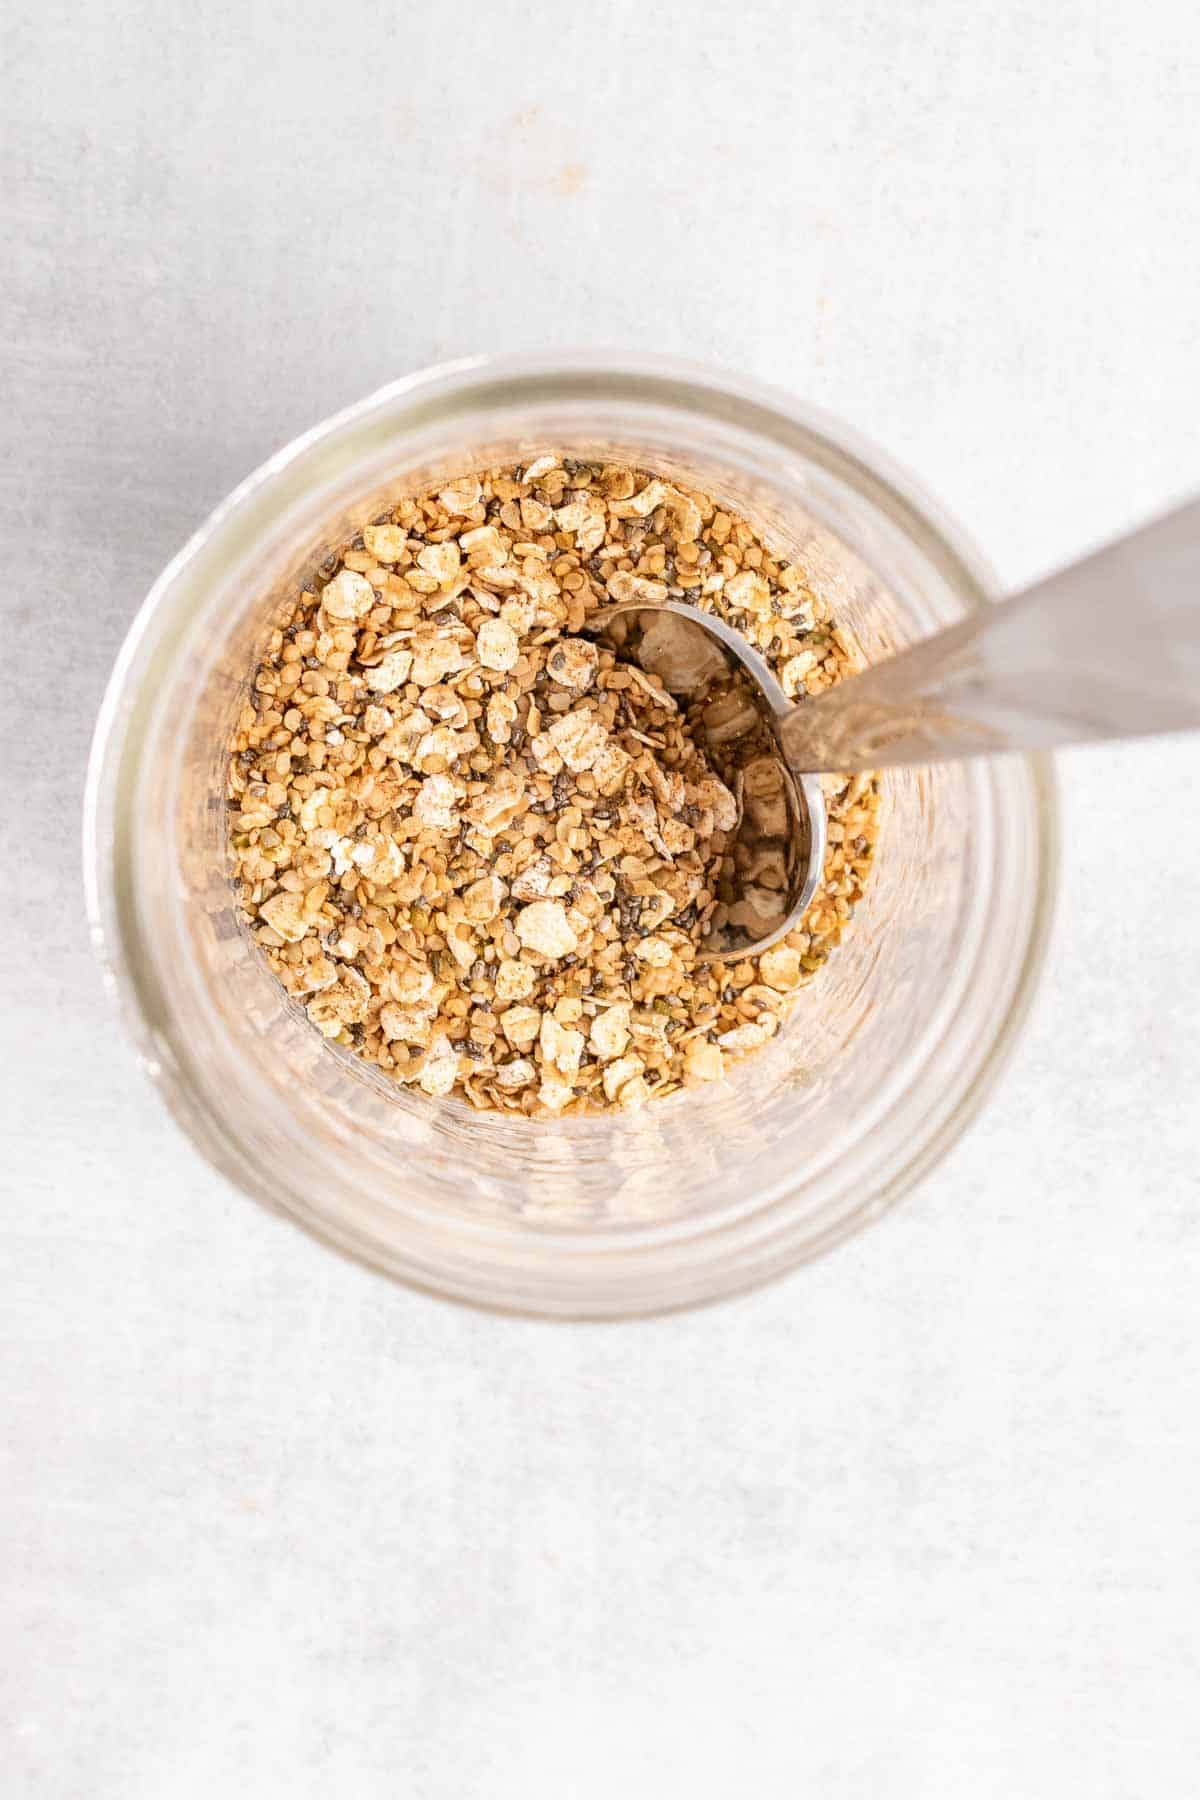 Hemp hearts, oats, chia seeds, and cinnamon in a jar with a spoon, as seen from above